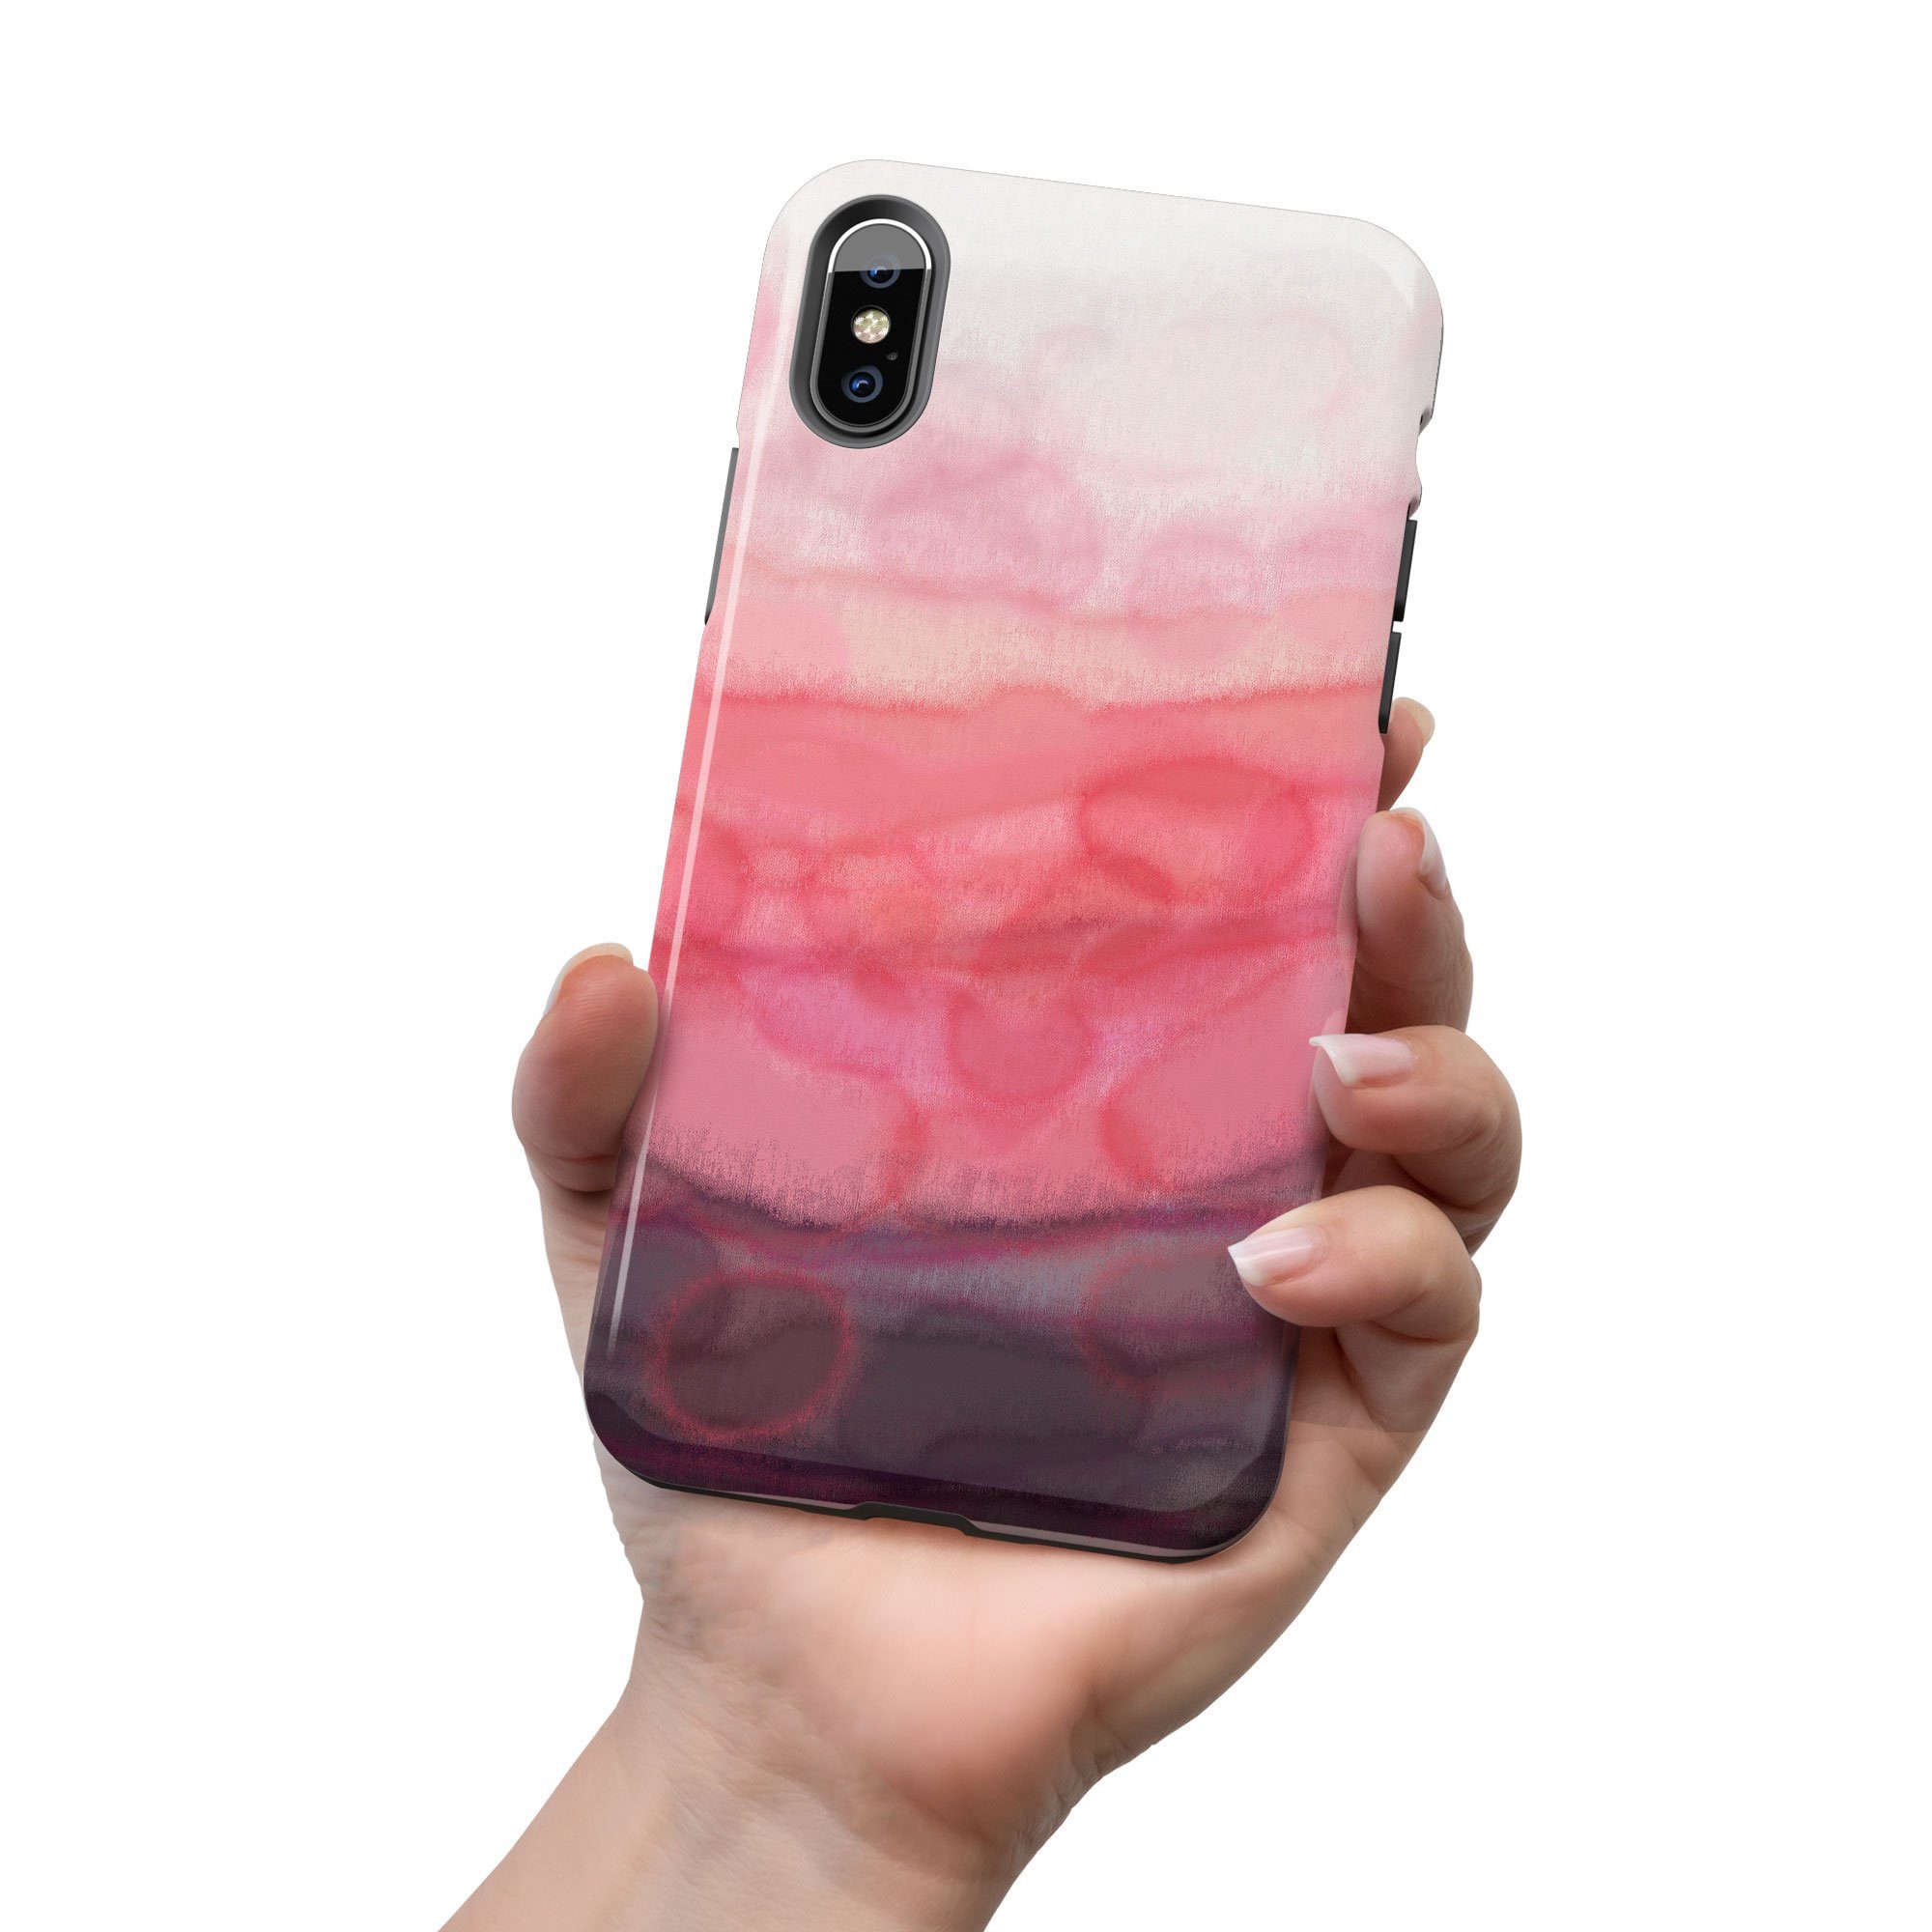 Serenity Pink iPhone Case - Louise Mead